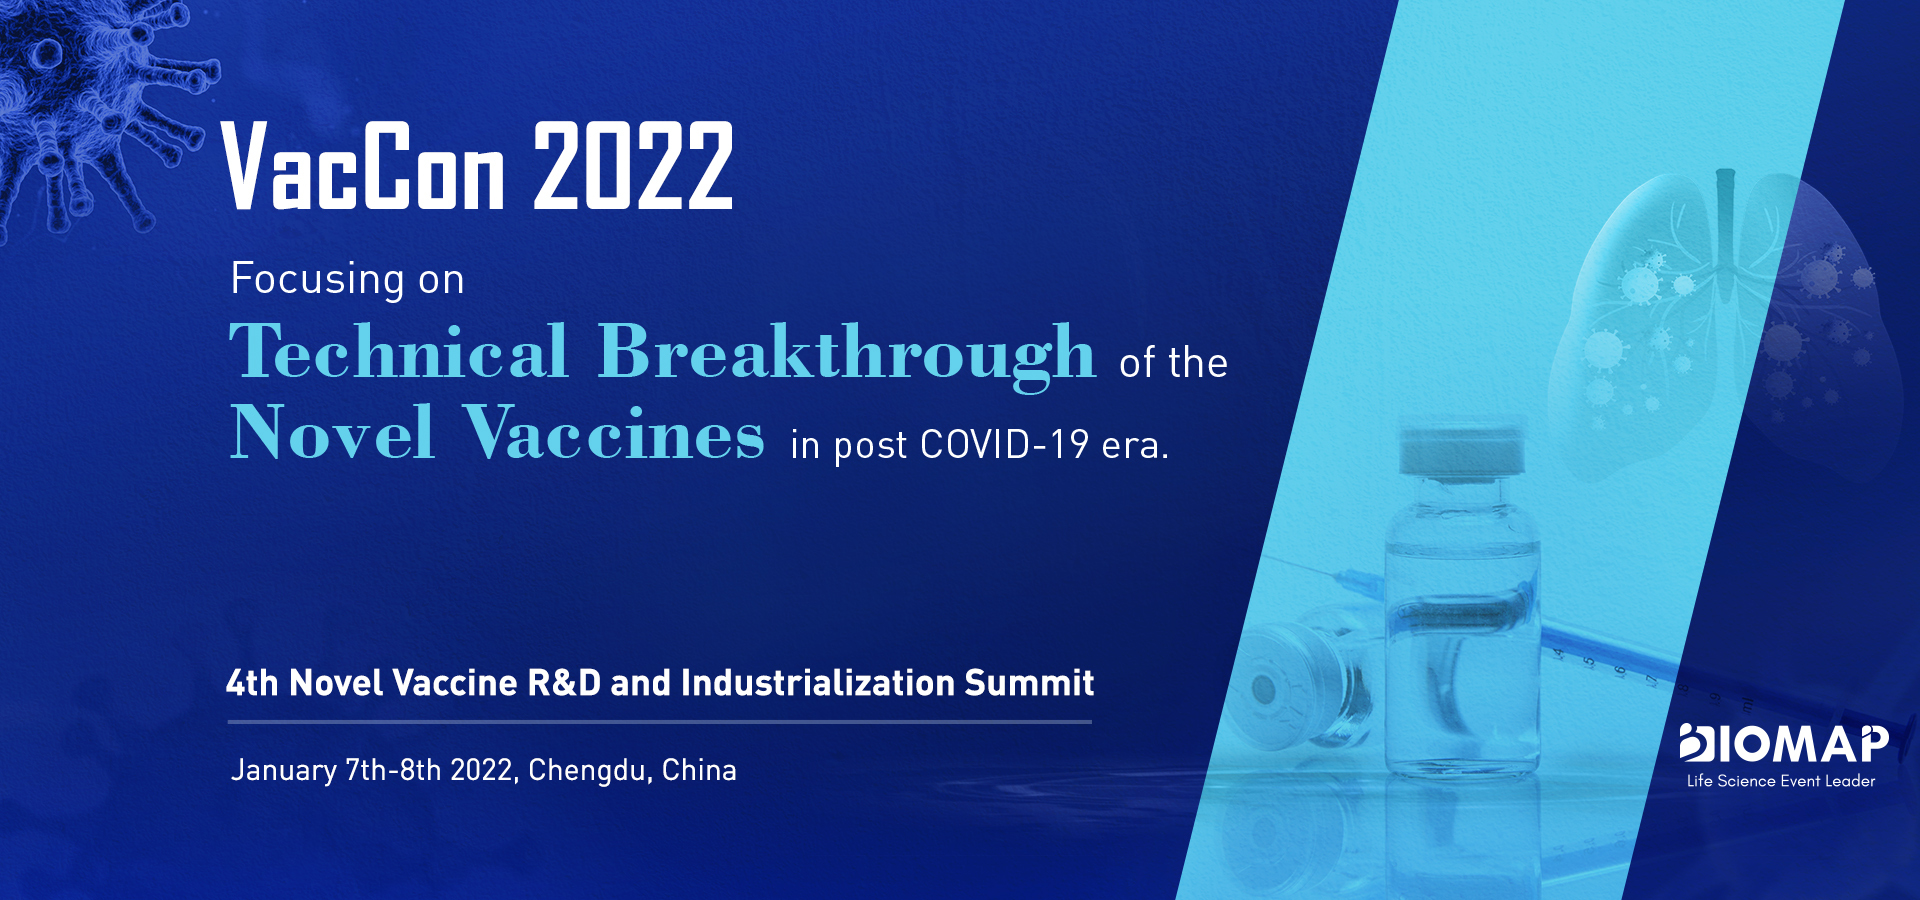 4th Novel Vaccine R&D and Industrialization Summit